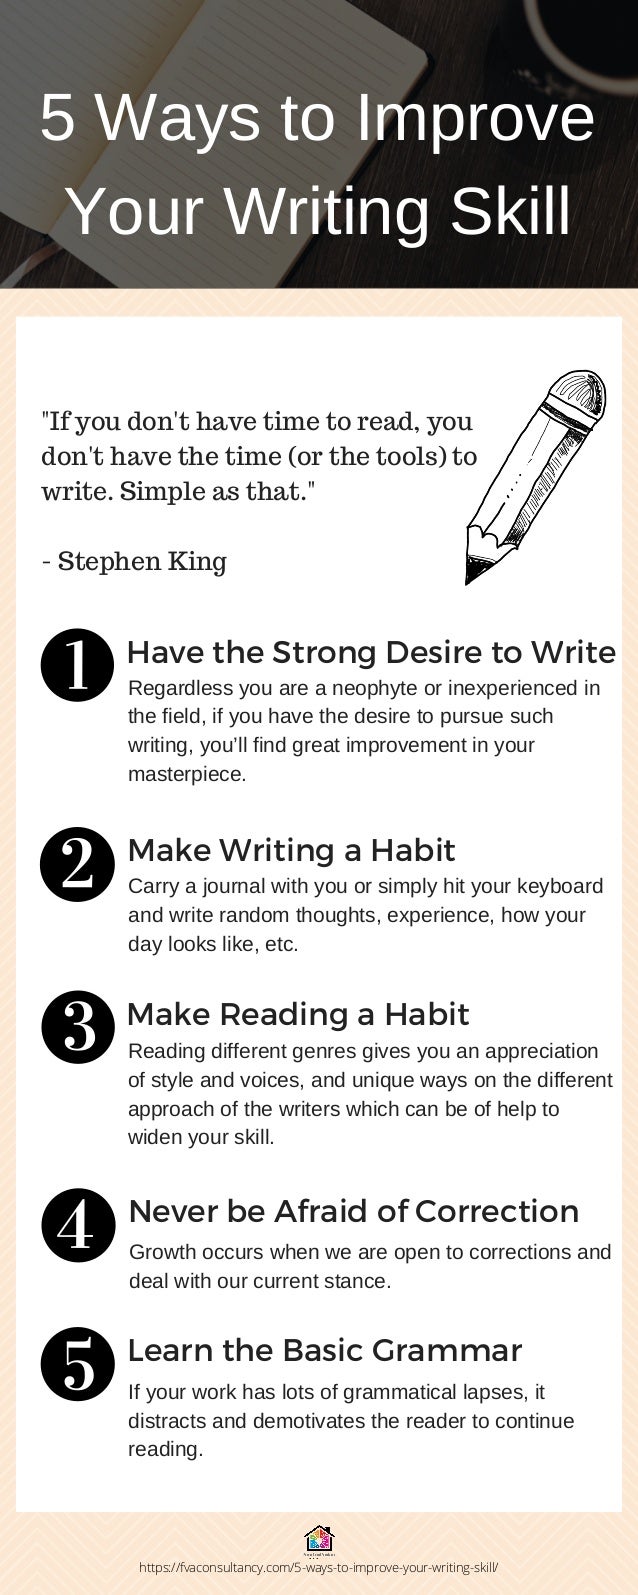 12 ways to improve your writing skill